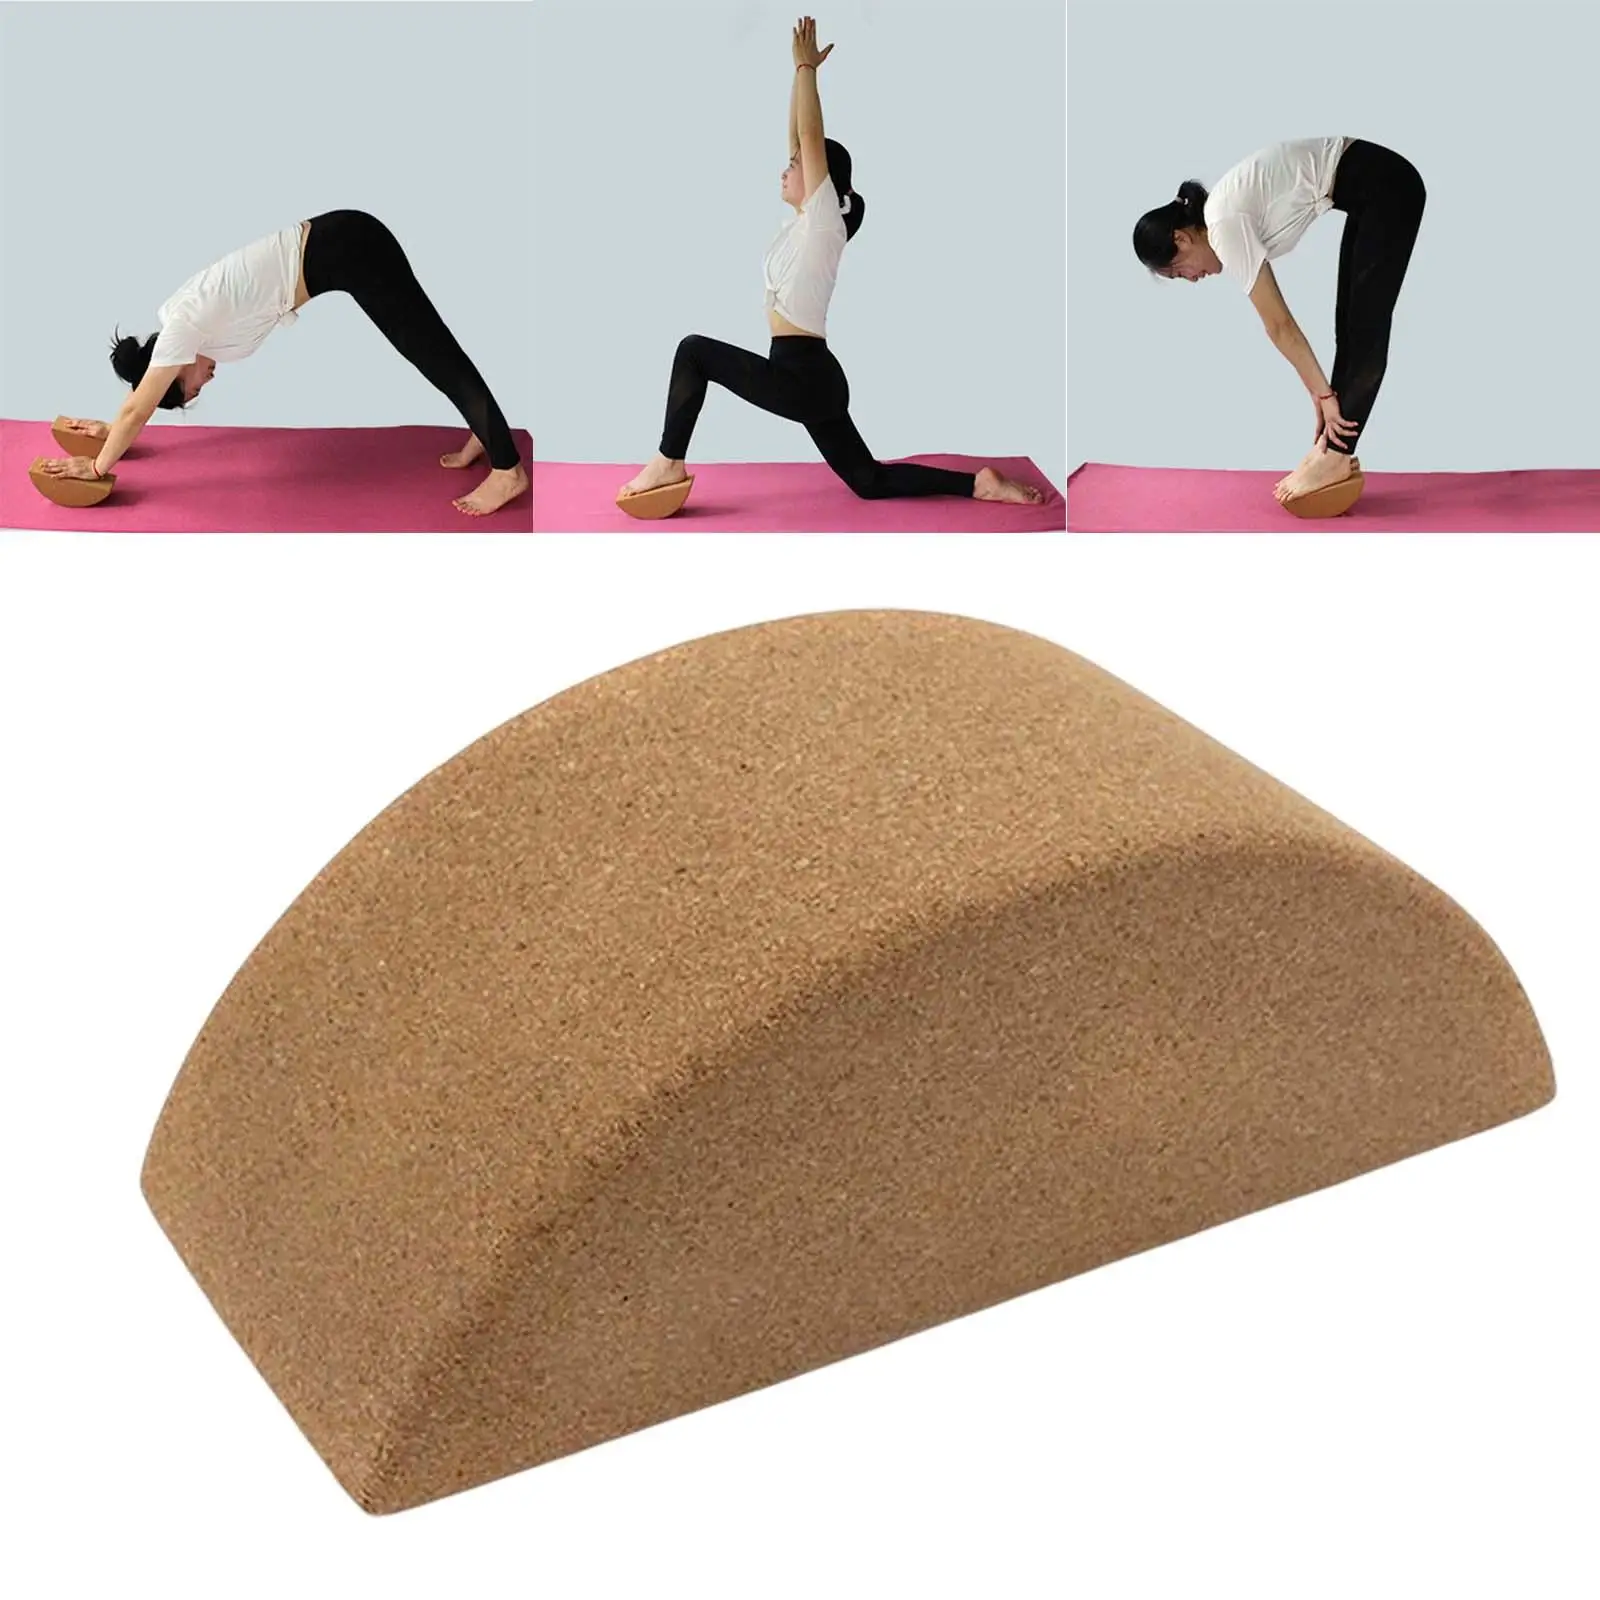 Yoga Blocks Balance Exercise Fitness Workout Indoor Yoga Gym Accessories